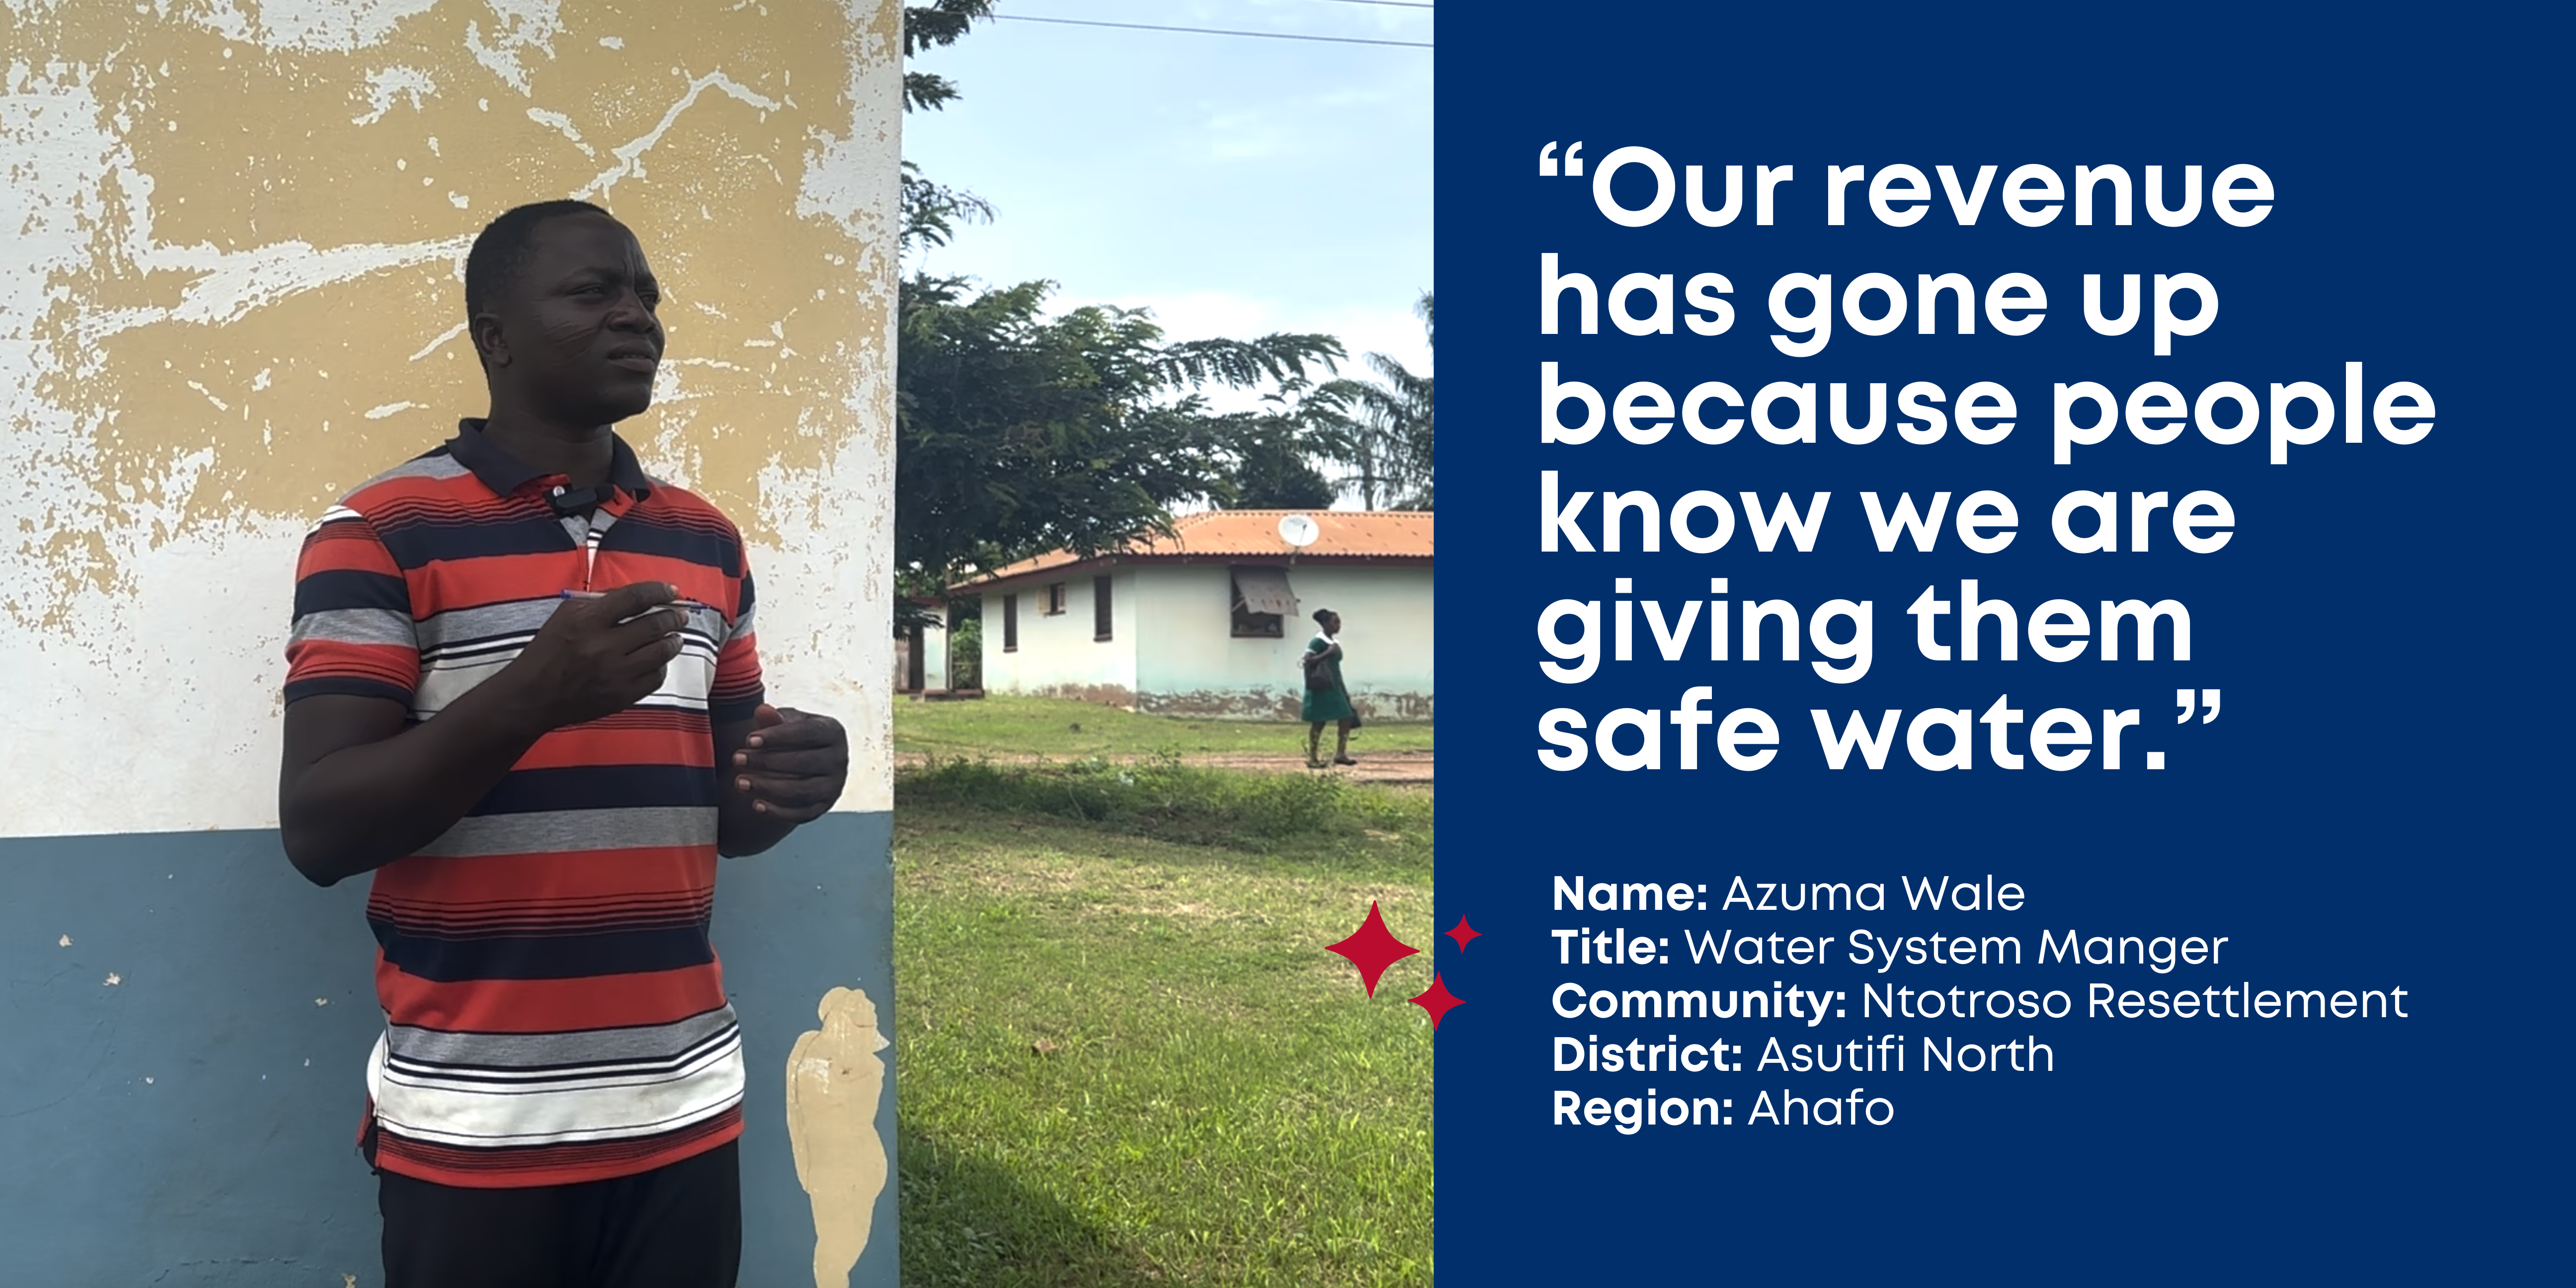 Water system manager, Azuma Wale gestures with his hands standing outside a white and blue building and says, "Our revenue has gone up because people know we are giving them safe water." Asutifi North, Ahafo, Ghana